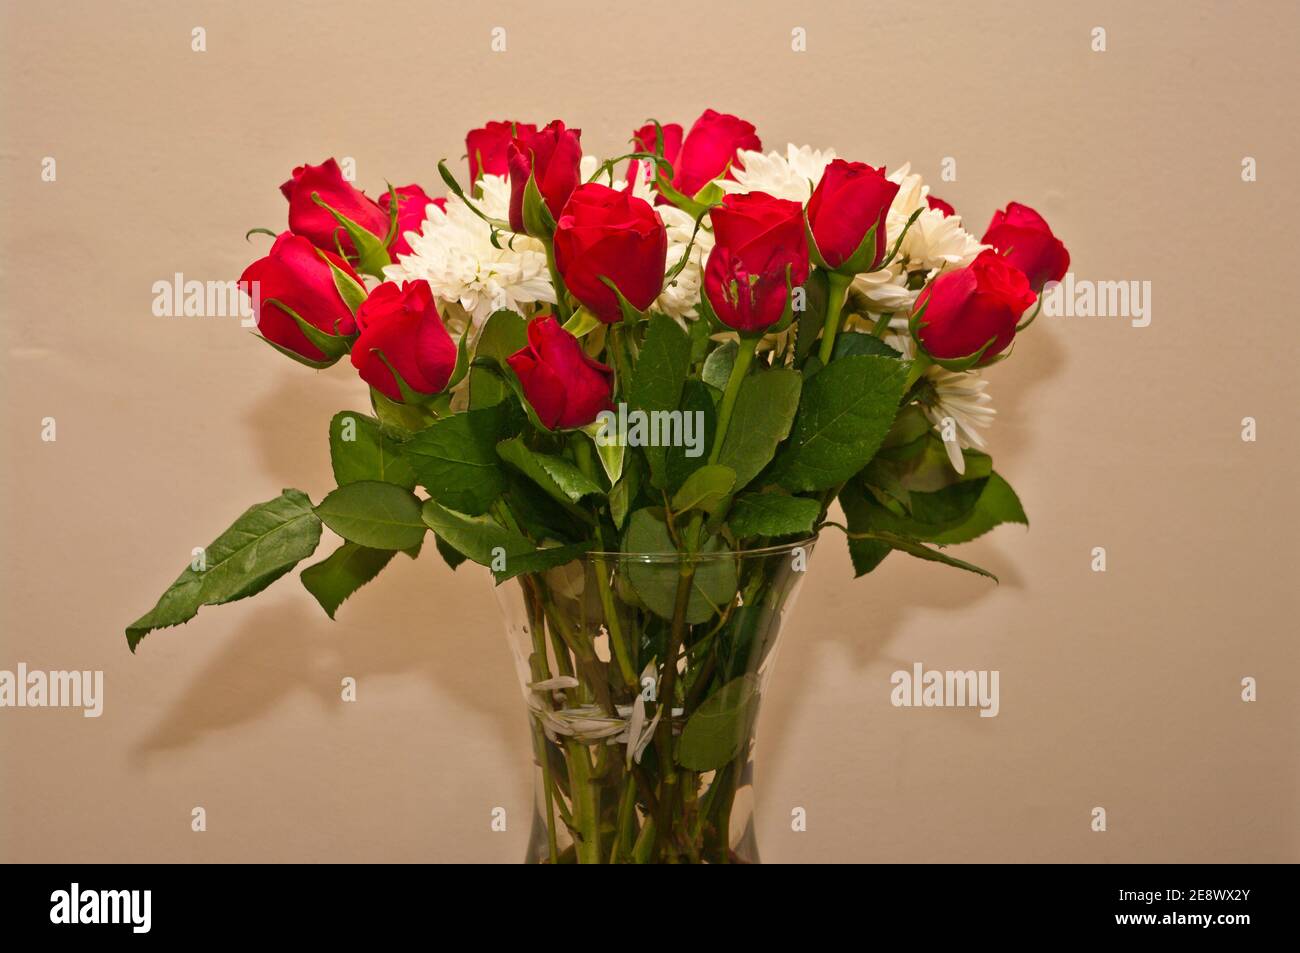 Red Roses and White Chrysanthemums In A Vase Stock Photo